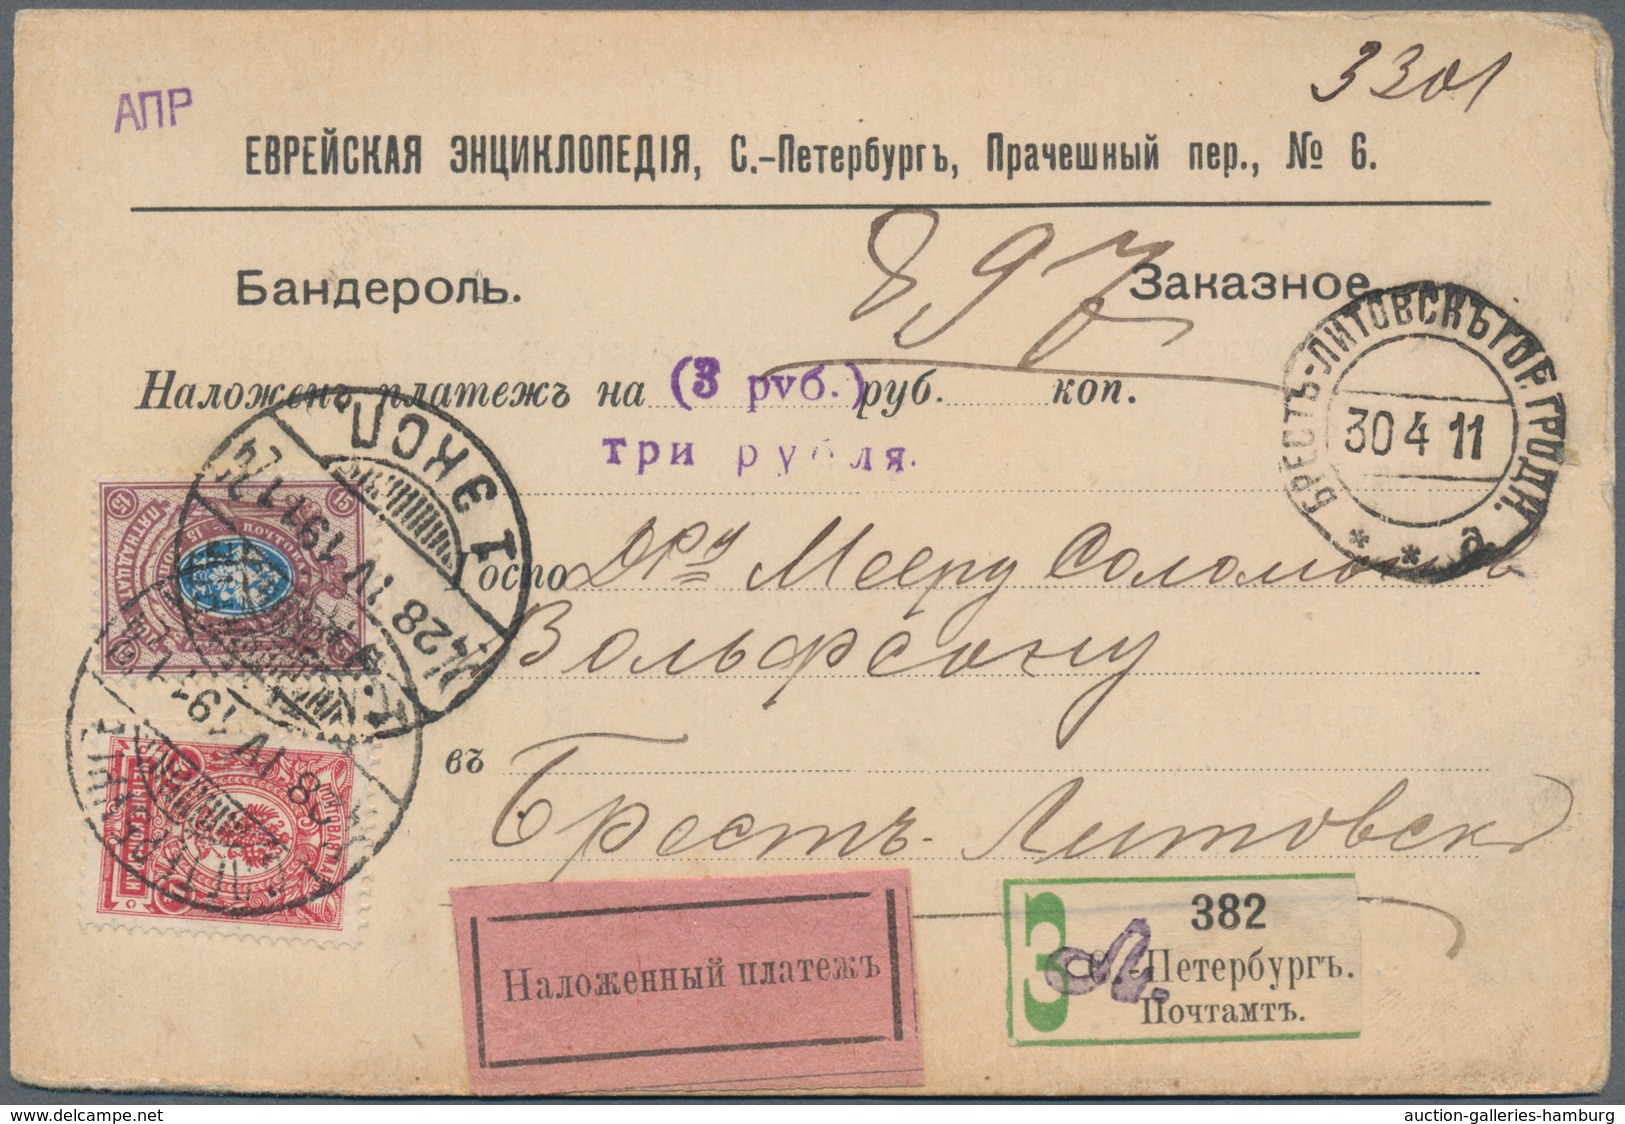 Russland: 1904/15 Three Items All Sent From St. Petersburg Cash On Delivery, One Card And Twocovers - Covers & Documents